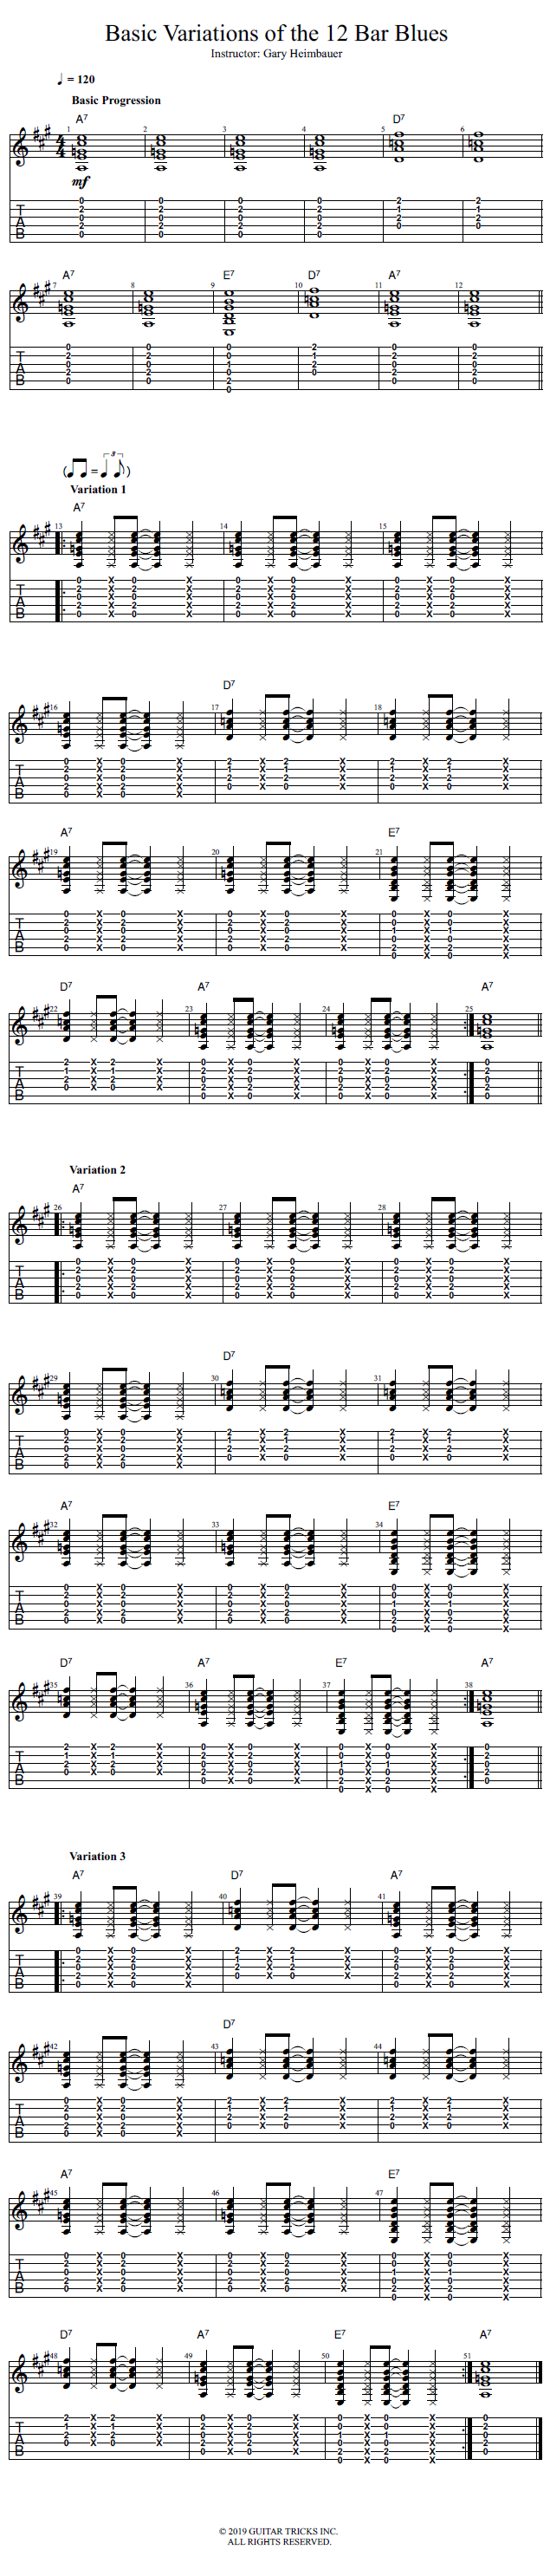 Basic Variations of the 12 Bar Blues song notation